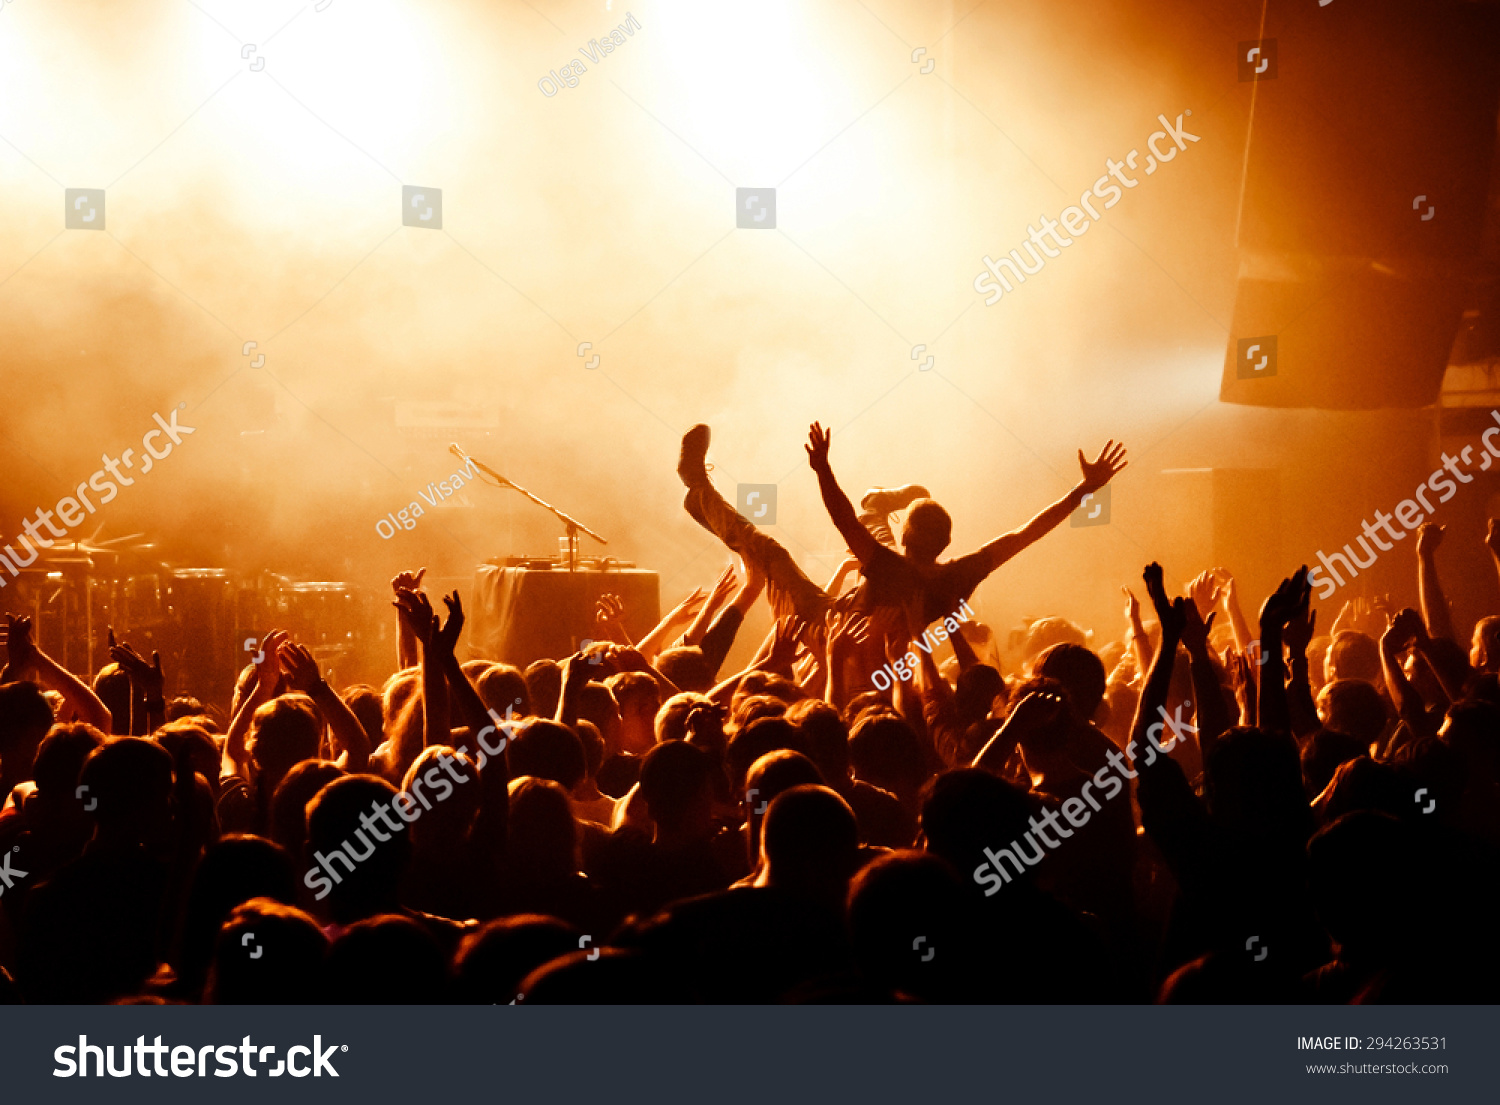 Crowd surfing during a musical performance #294263531